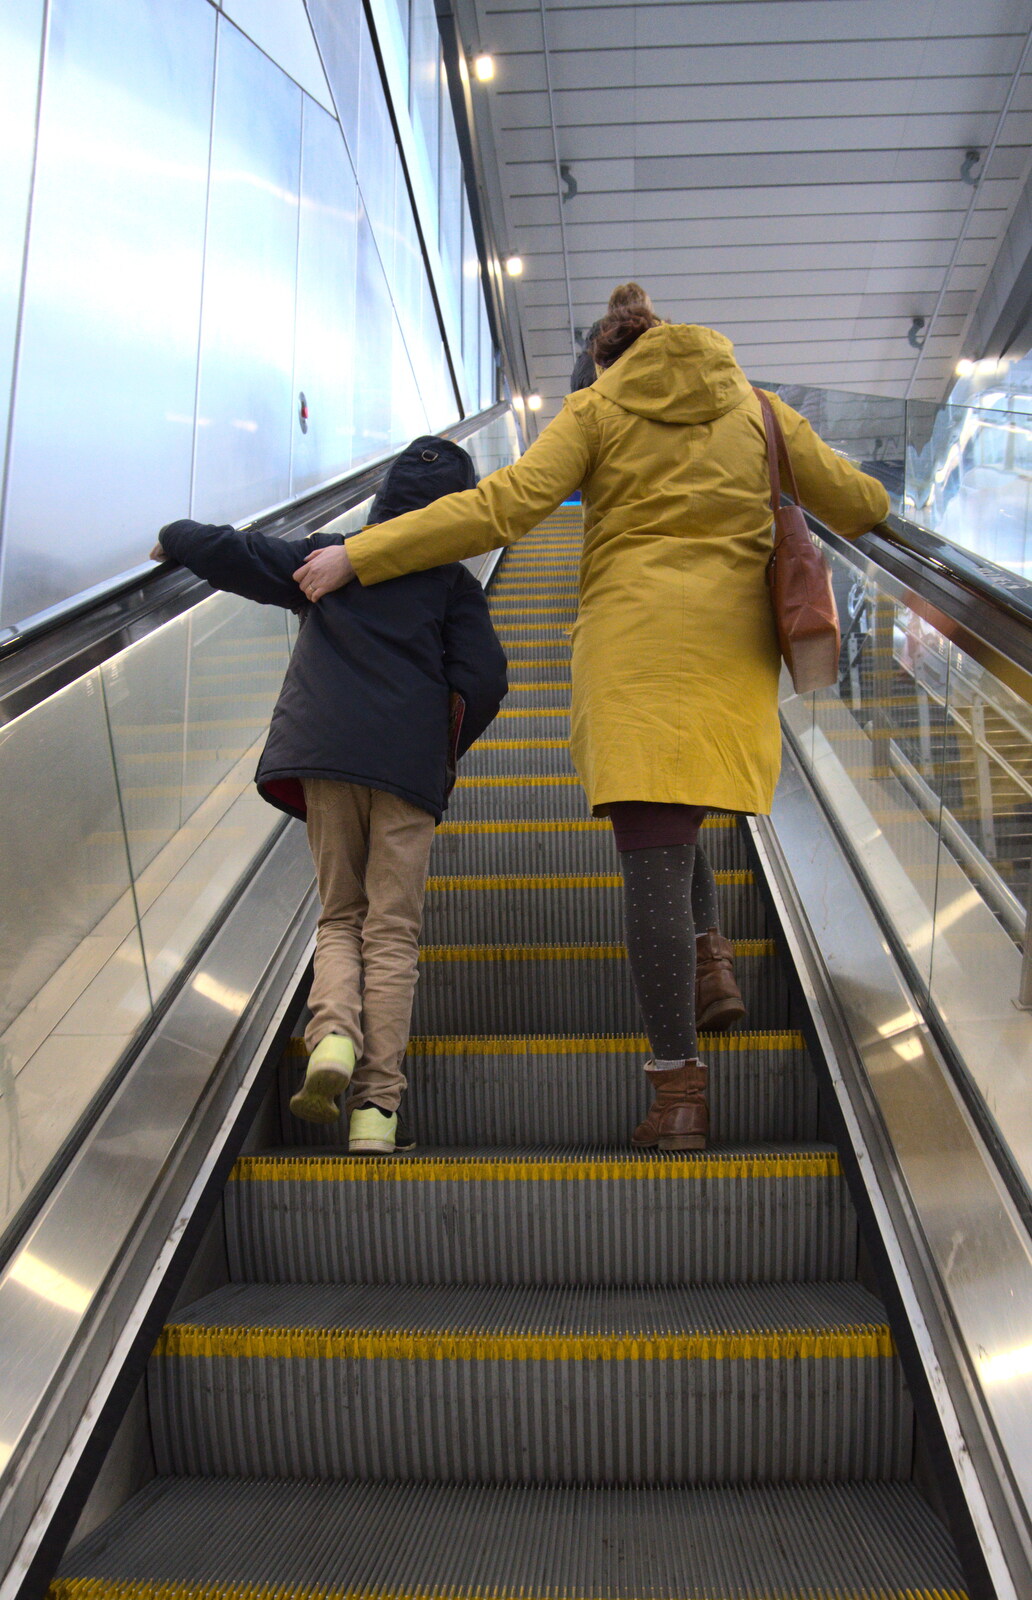 Harry and Isobel on the escalator from HMS Belfast and the South Bank, Southwark, London - 17th February 2020